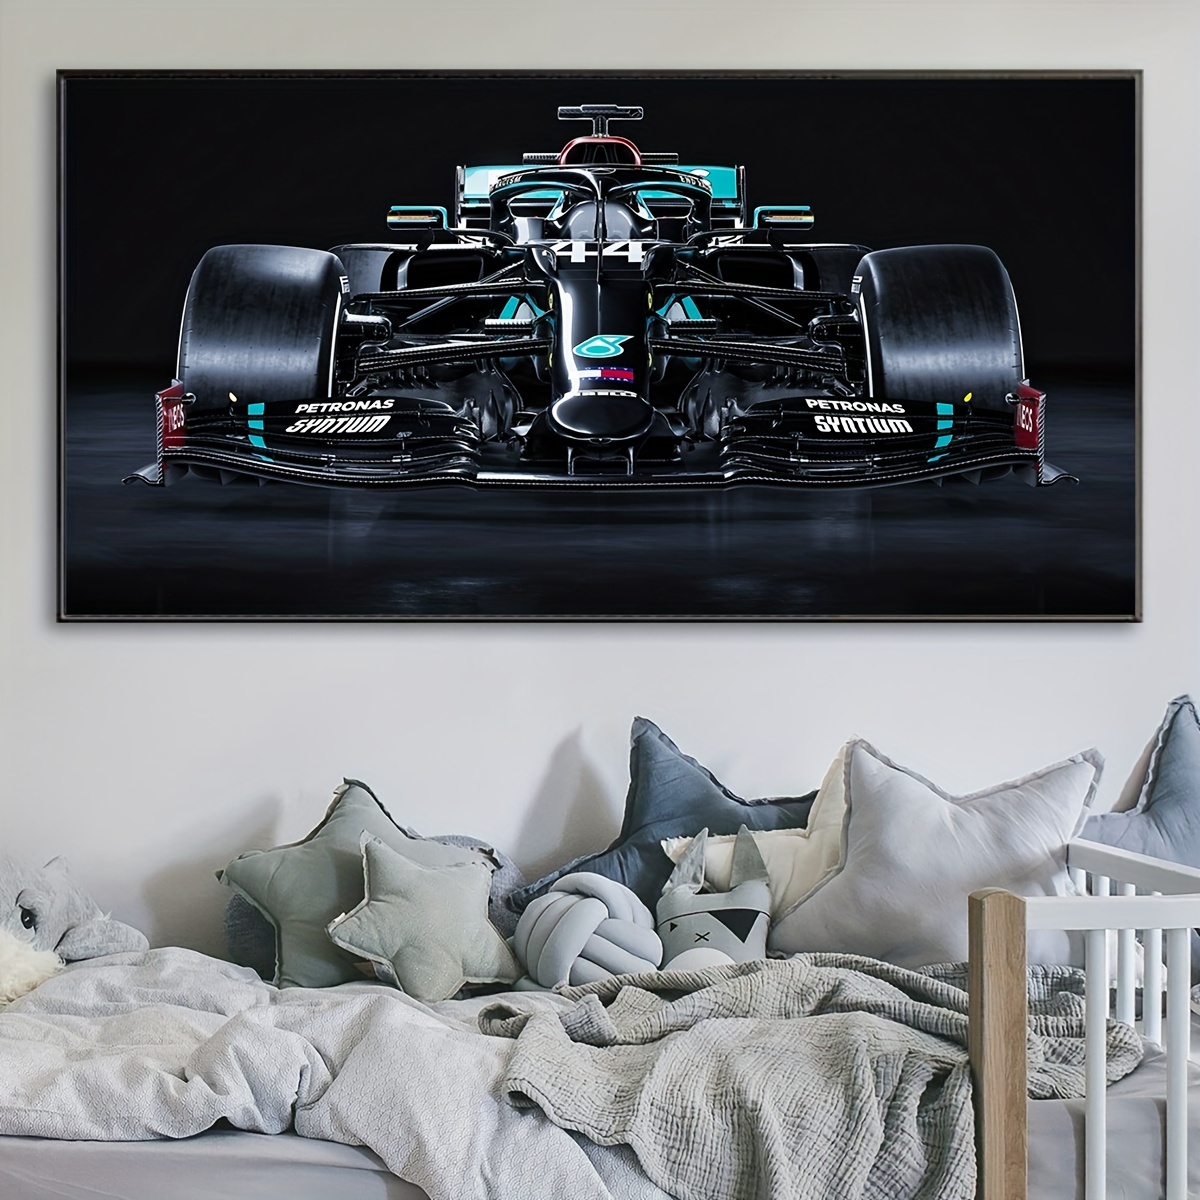 

1pc Unframed Canvas Poster, Formula Racing Car Painting, Canvas Wall Art, Artwork Wall Painting For Gift, Bedroom, Office, Living Room, Cafe, Bar, Wall Decor, Home And Dormitory Decoration